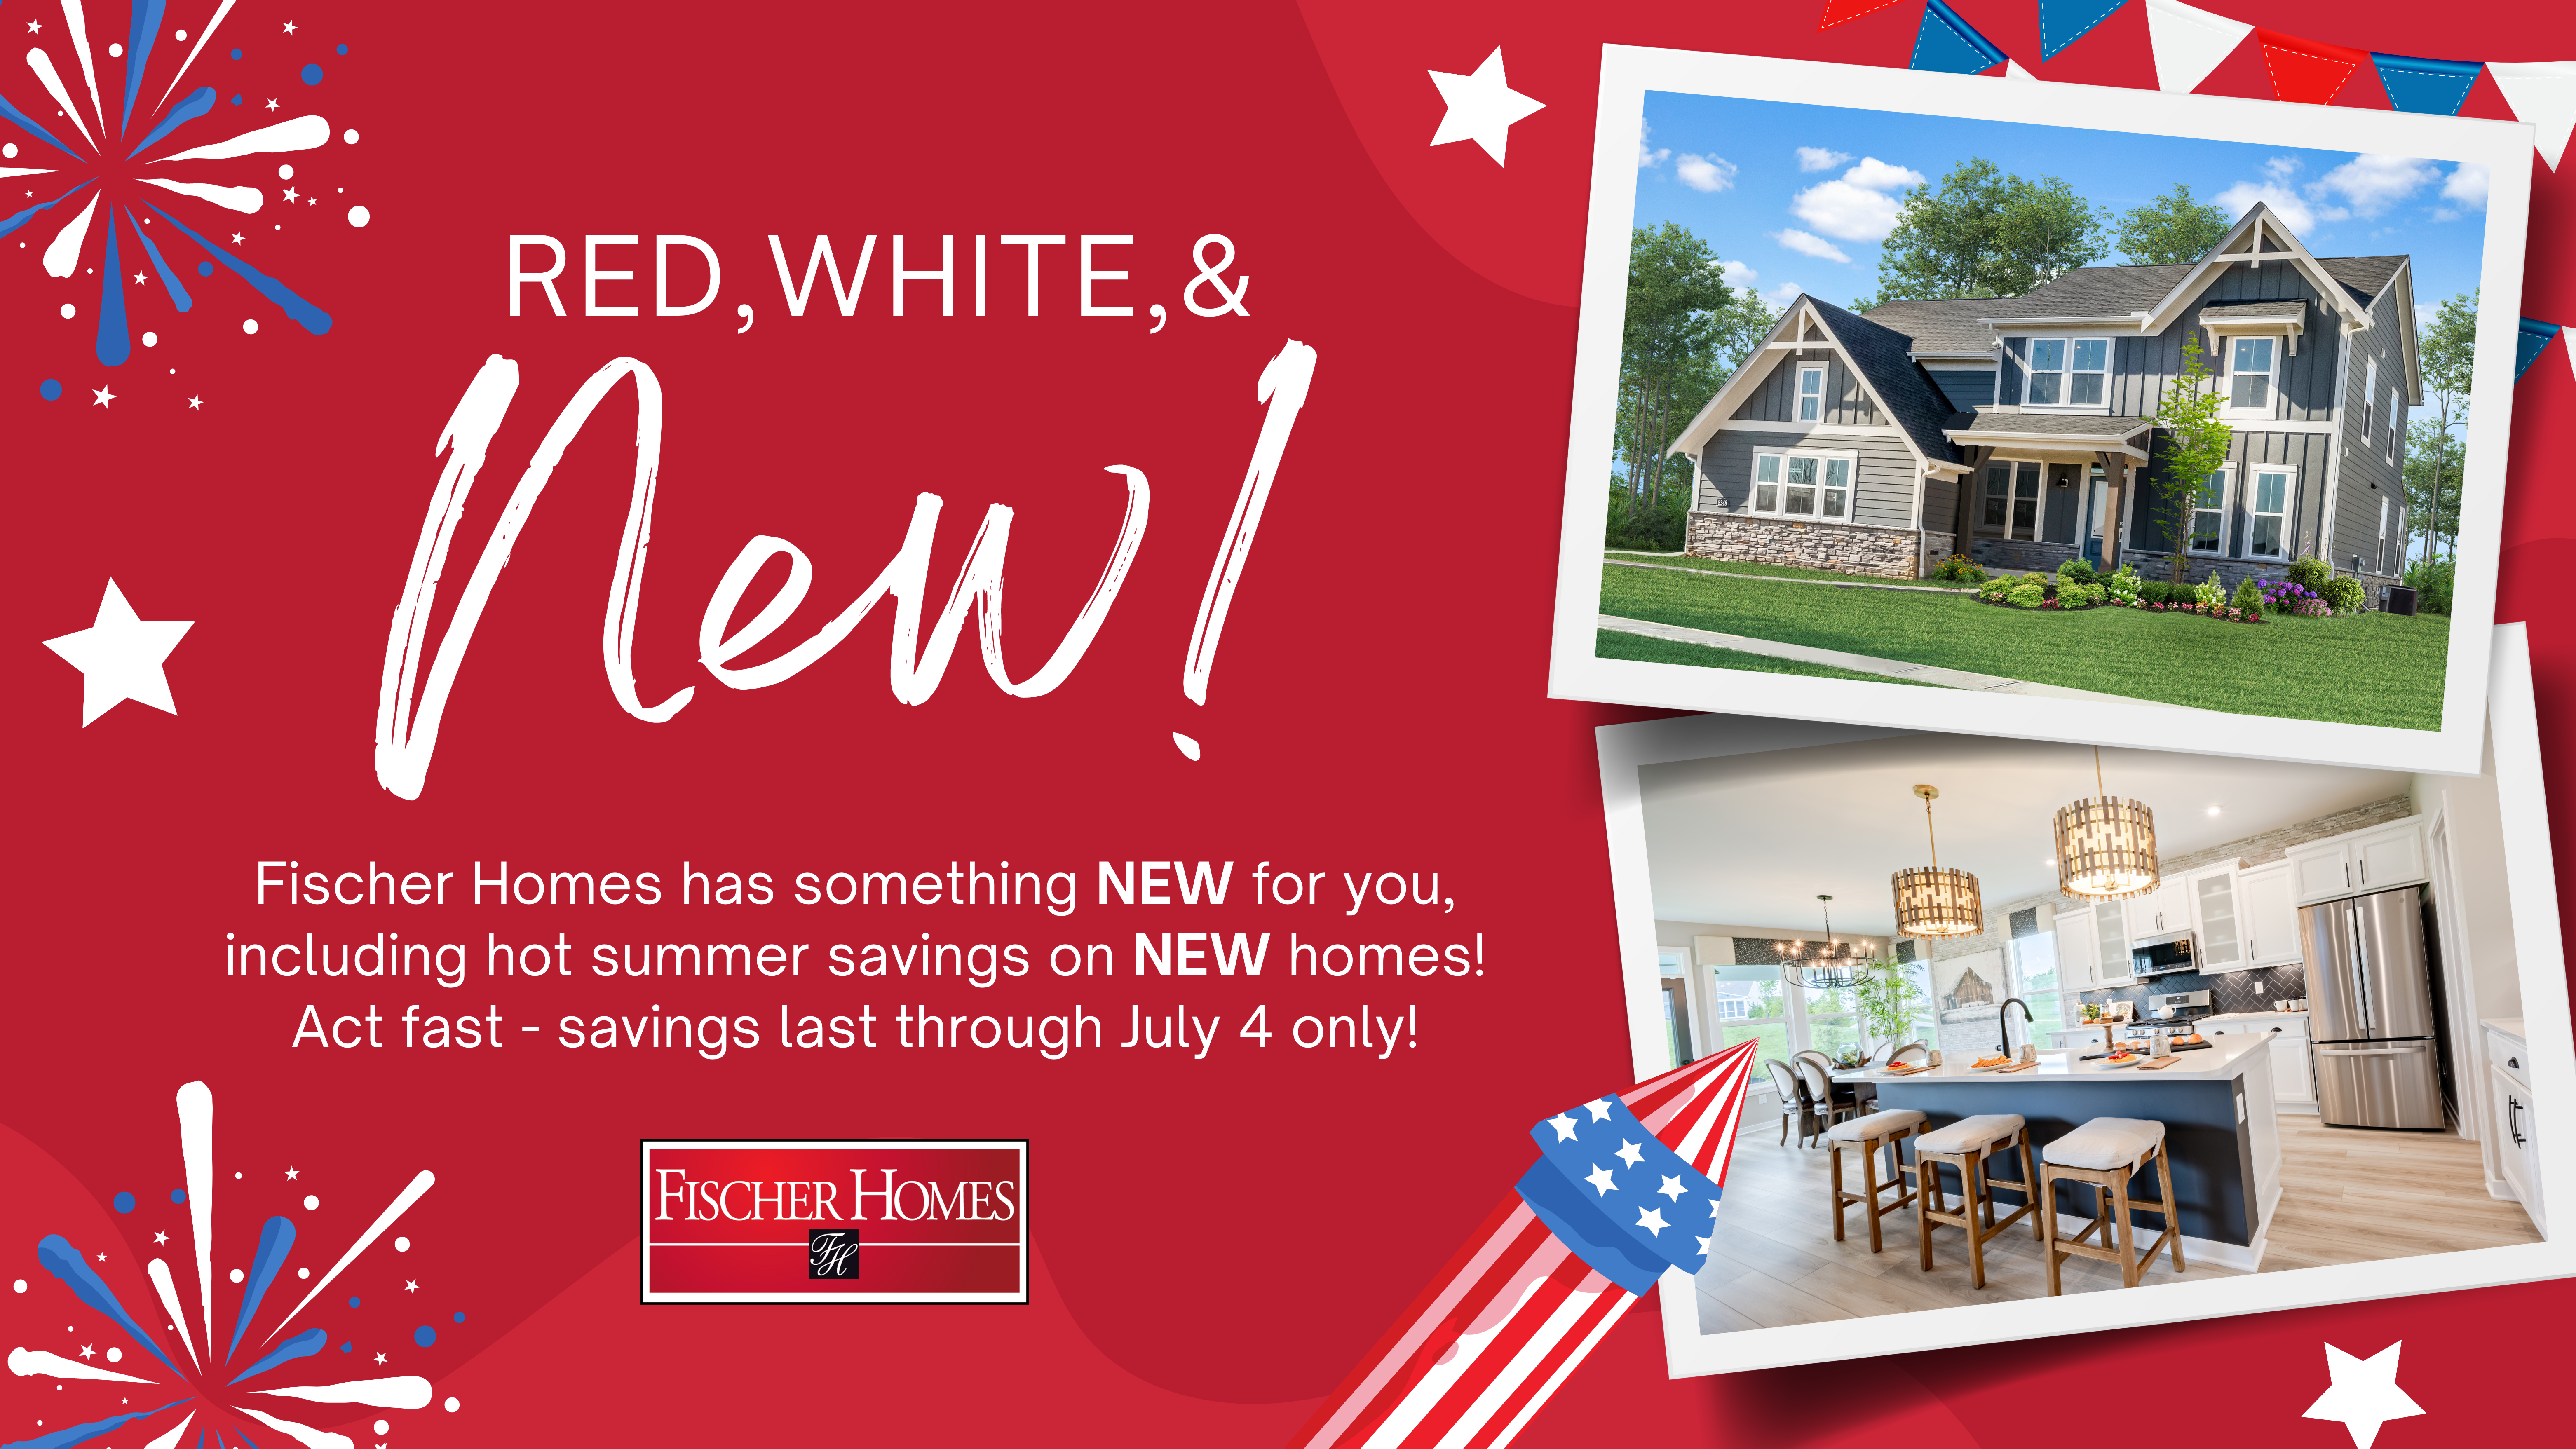 Red, White, & New! The Perfect Home for Every Stage of life